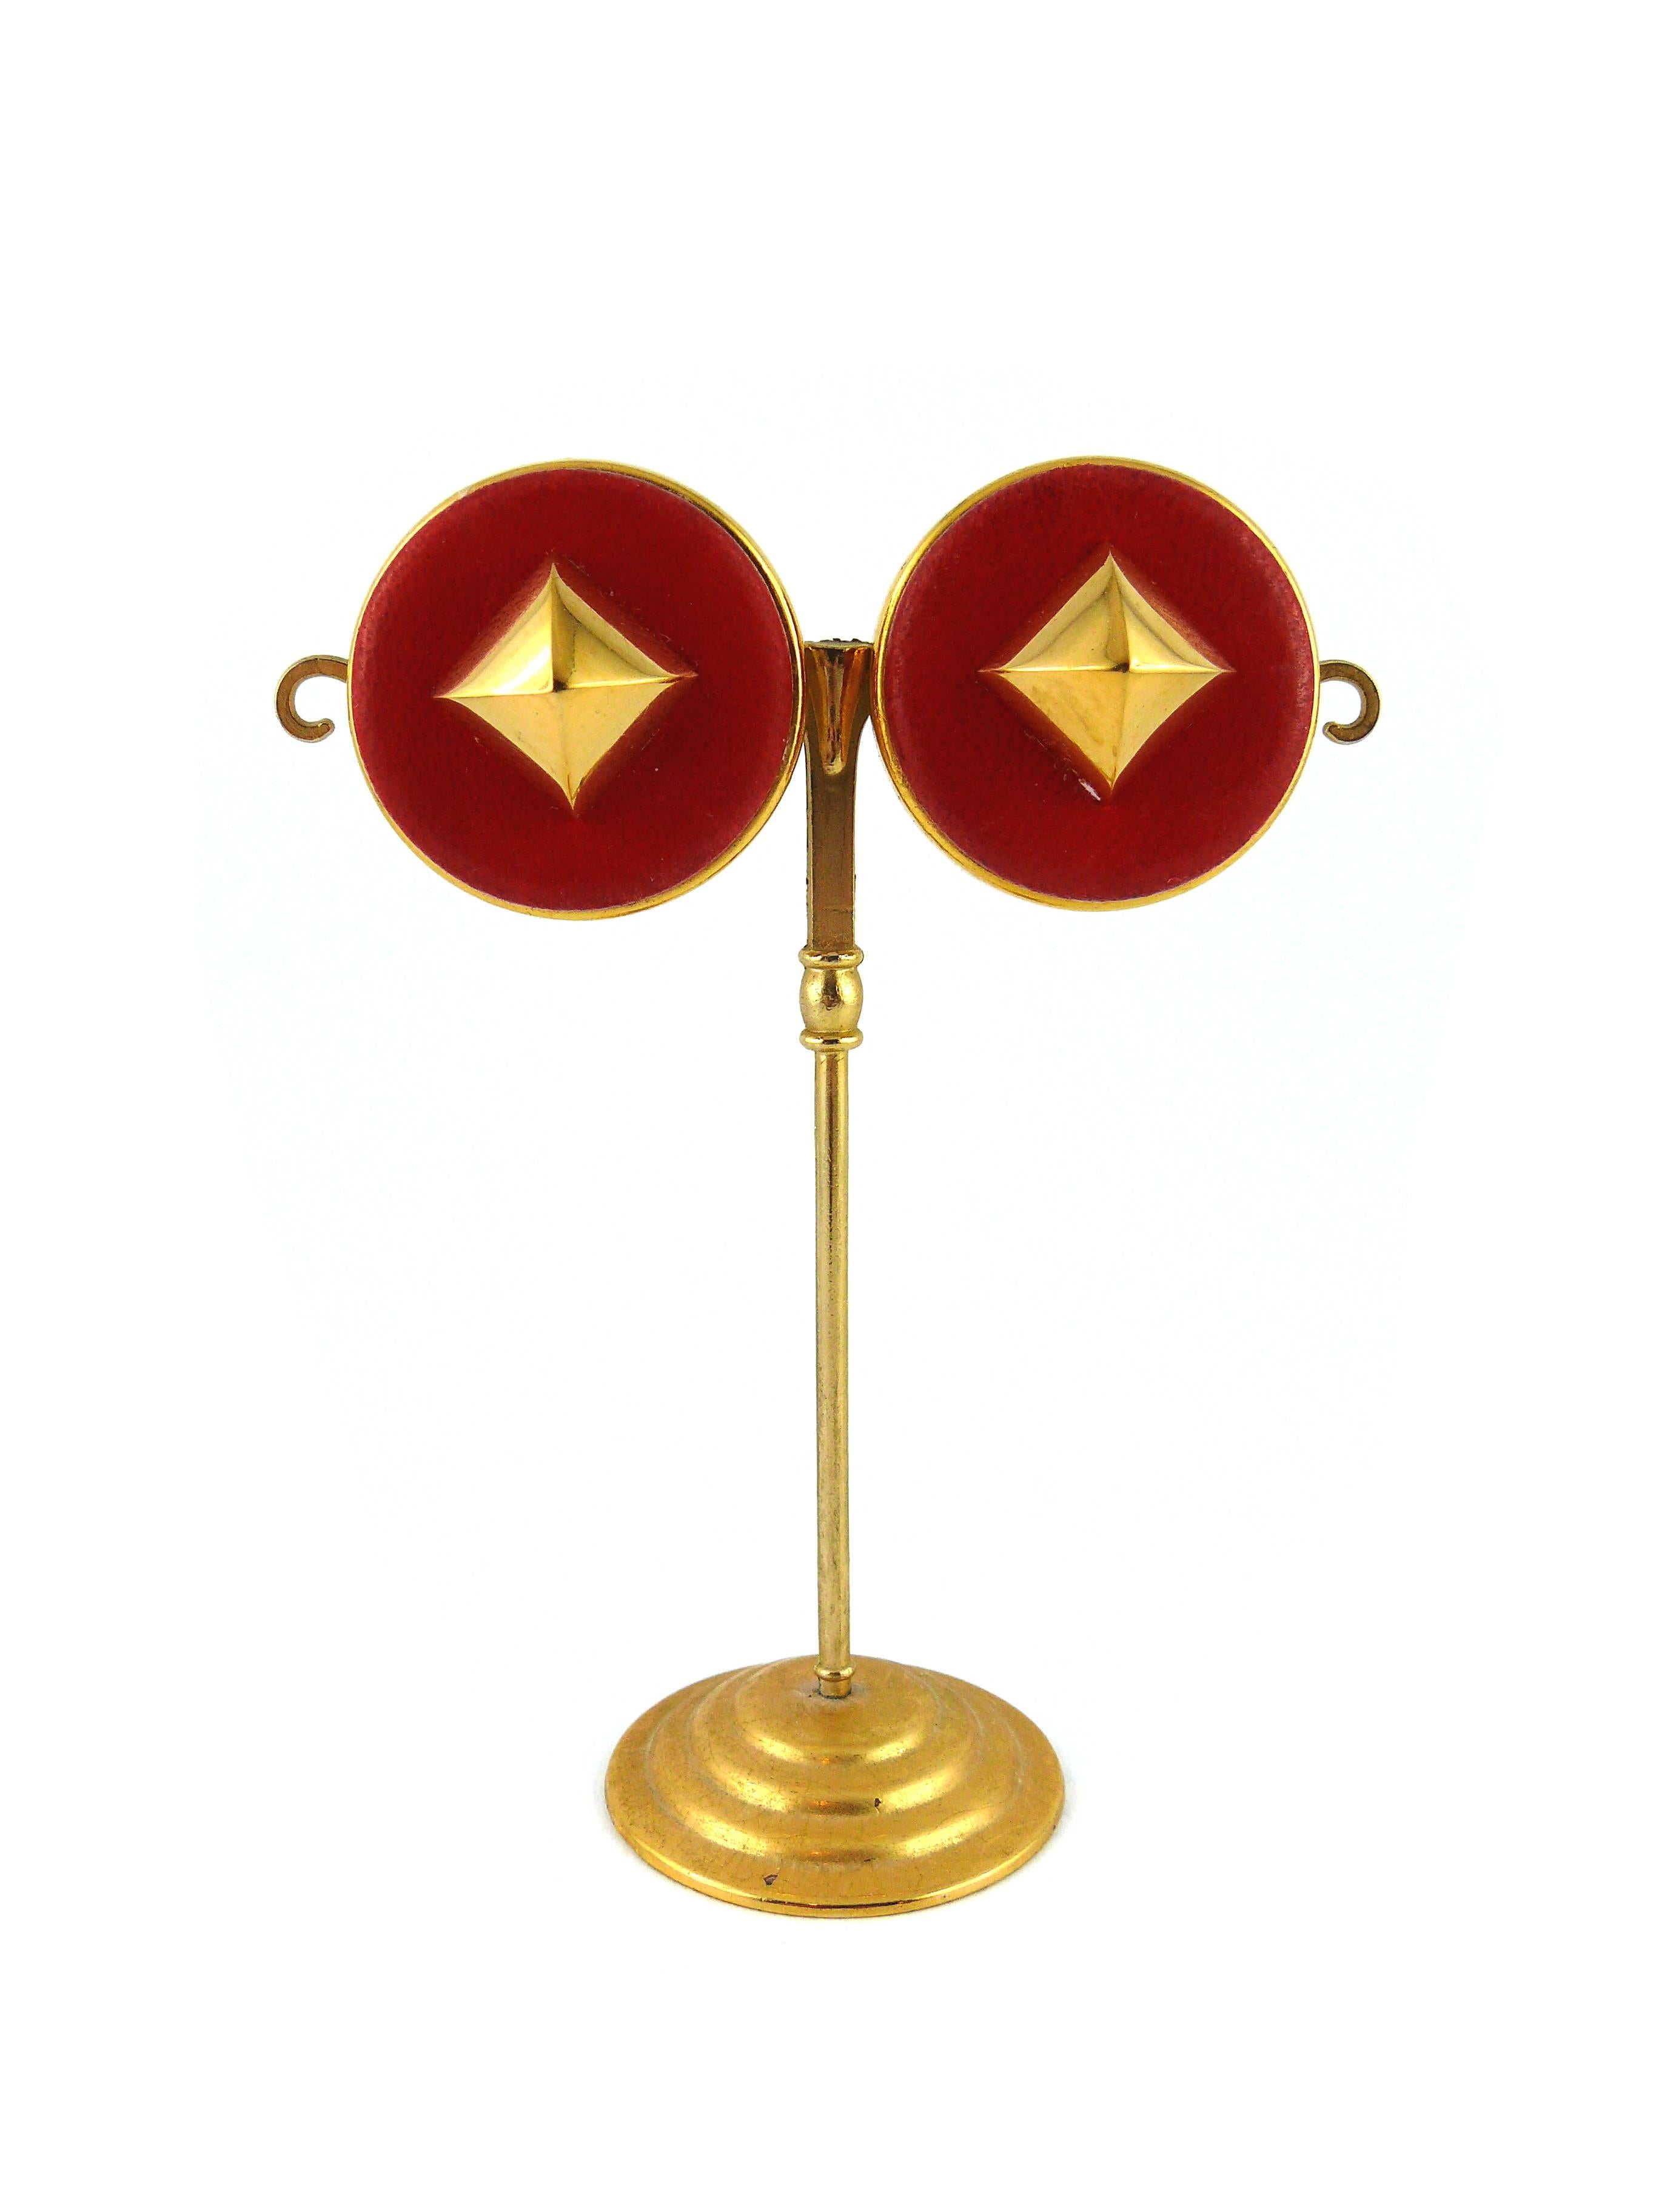 HERMES classic vintage Medor stud clip-on earrings.

Strawberry color lambskin leather embellished with gold tone pyramid shaped studs.

Marked Hermes Paris.

Note
As a buyer, you are fully responsible for customs duties, other local taxes